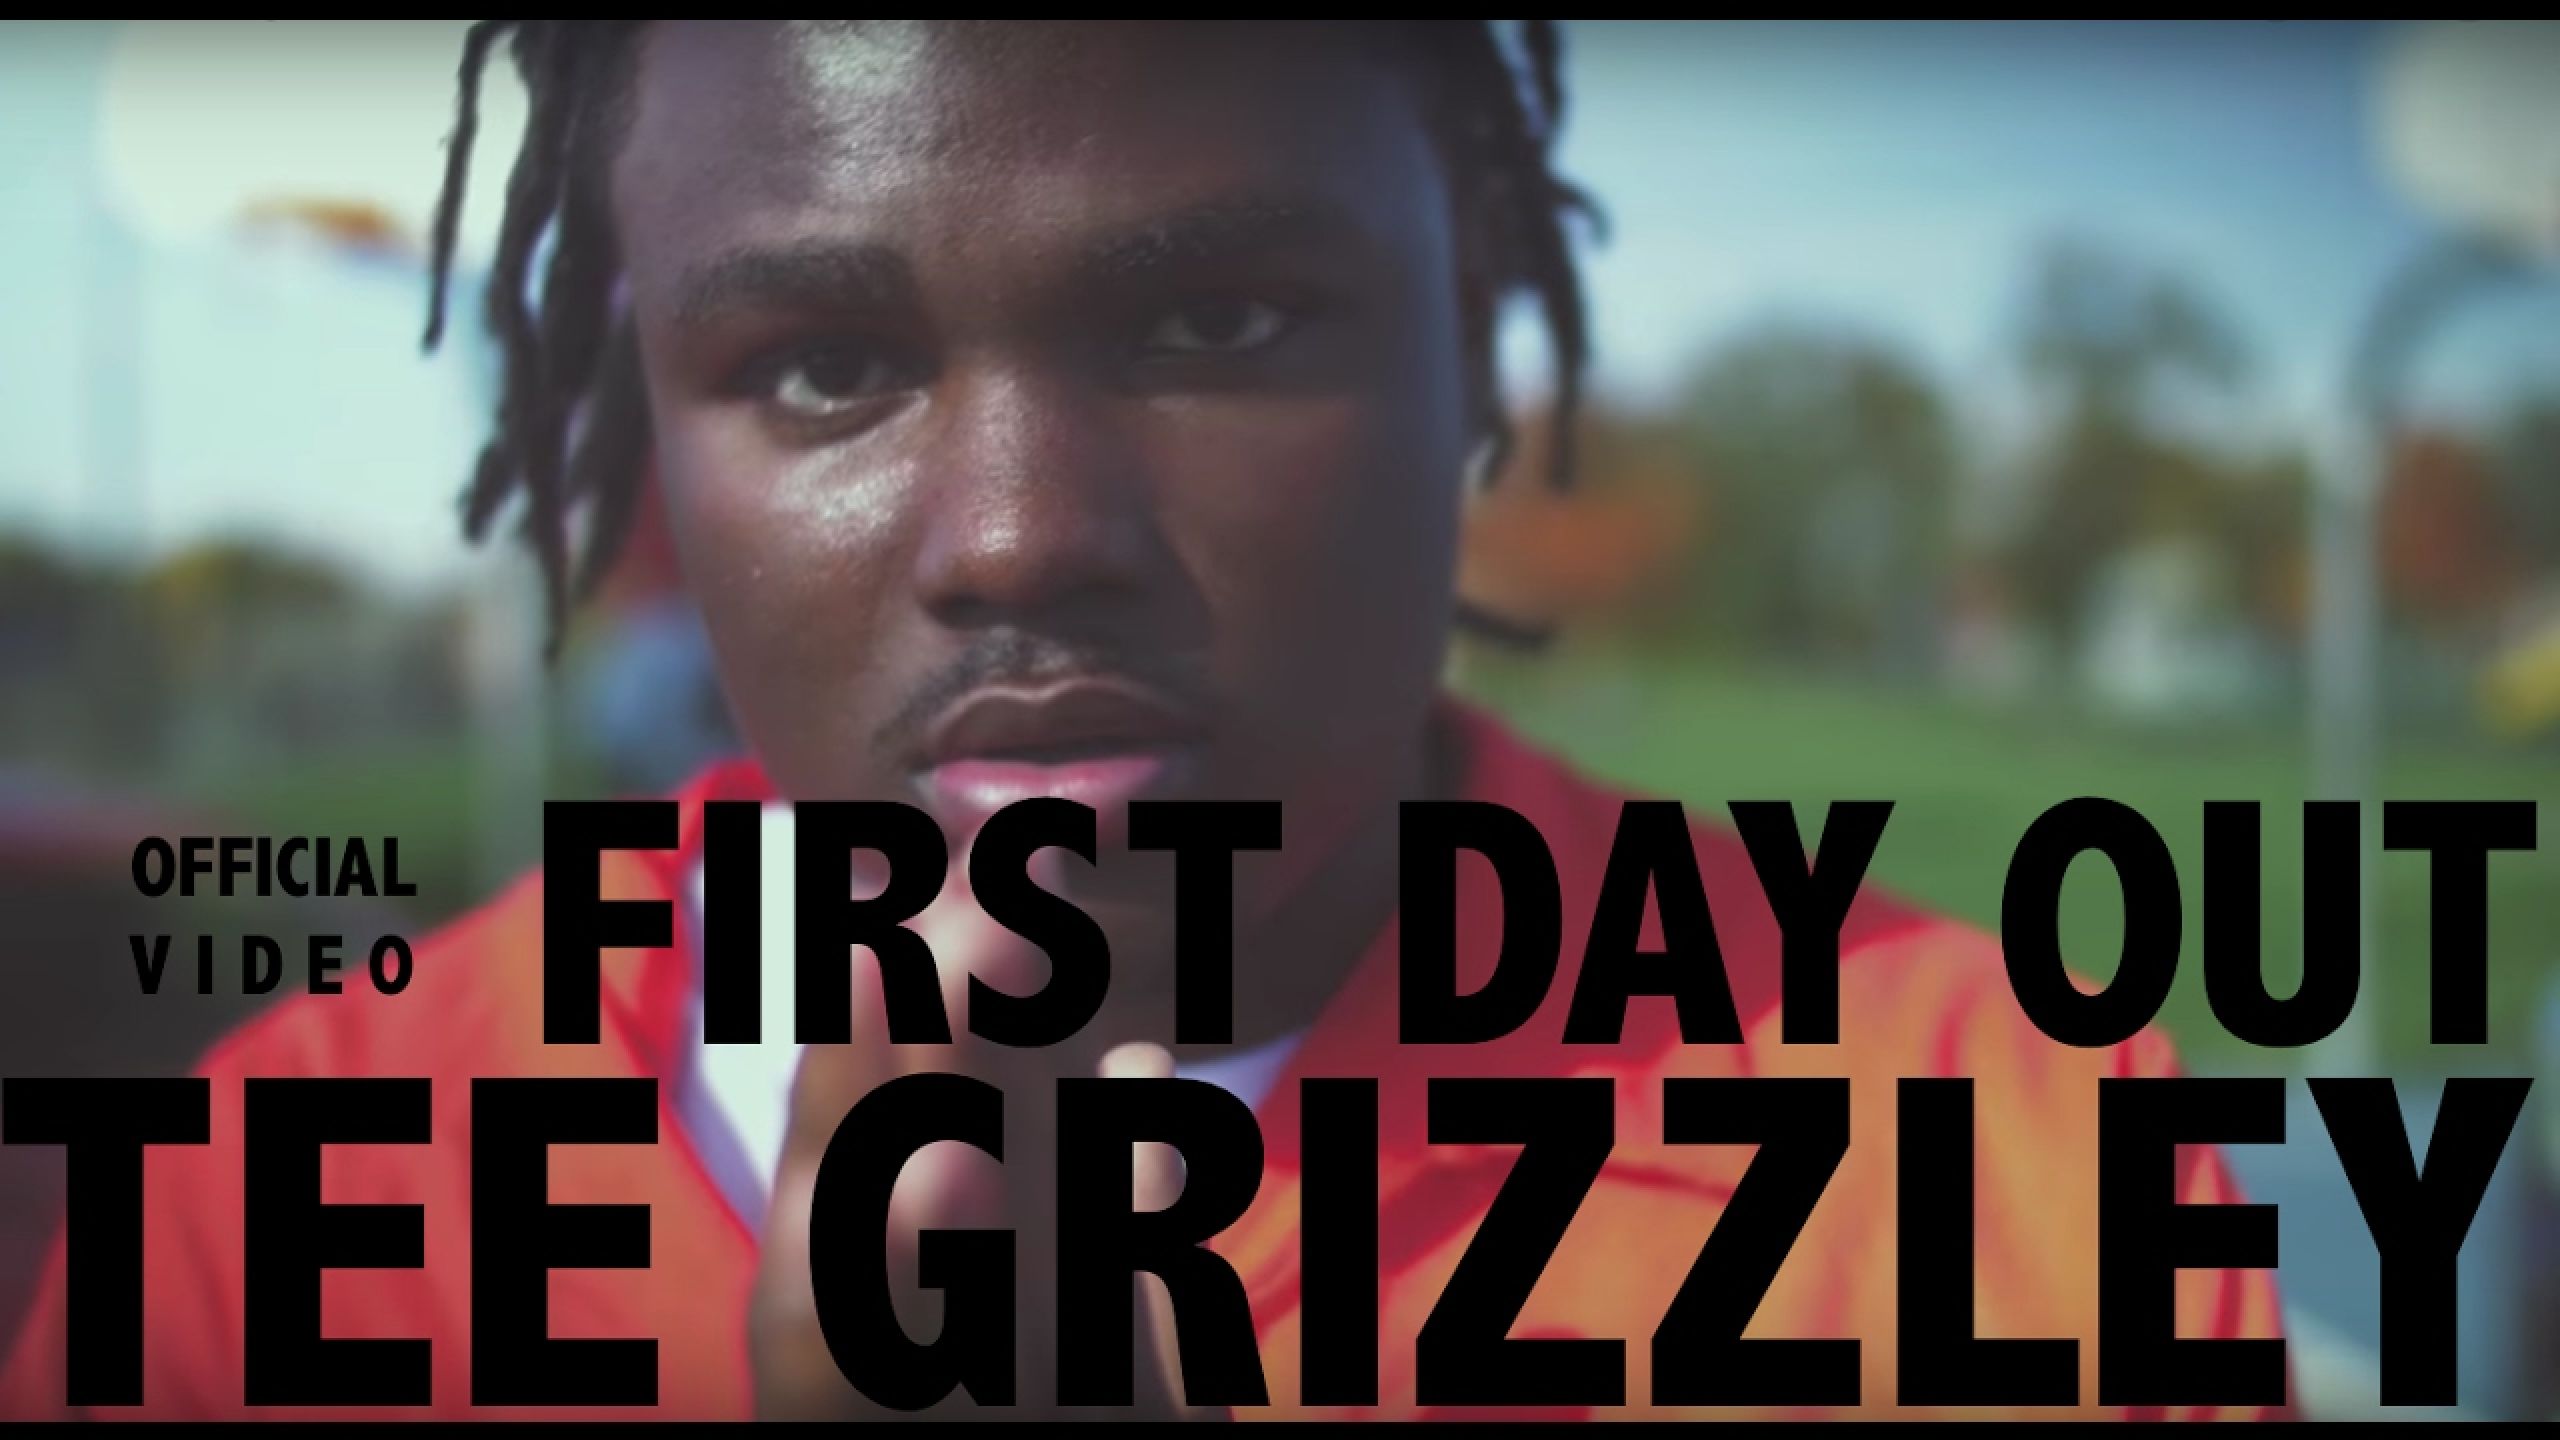 Дай аут. First Day out. Activated Tee Grizzley. First Day out Tee Grizzley текст. One_Day.out.